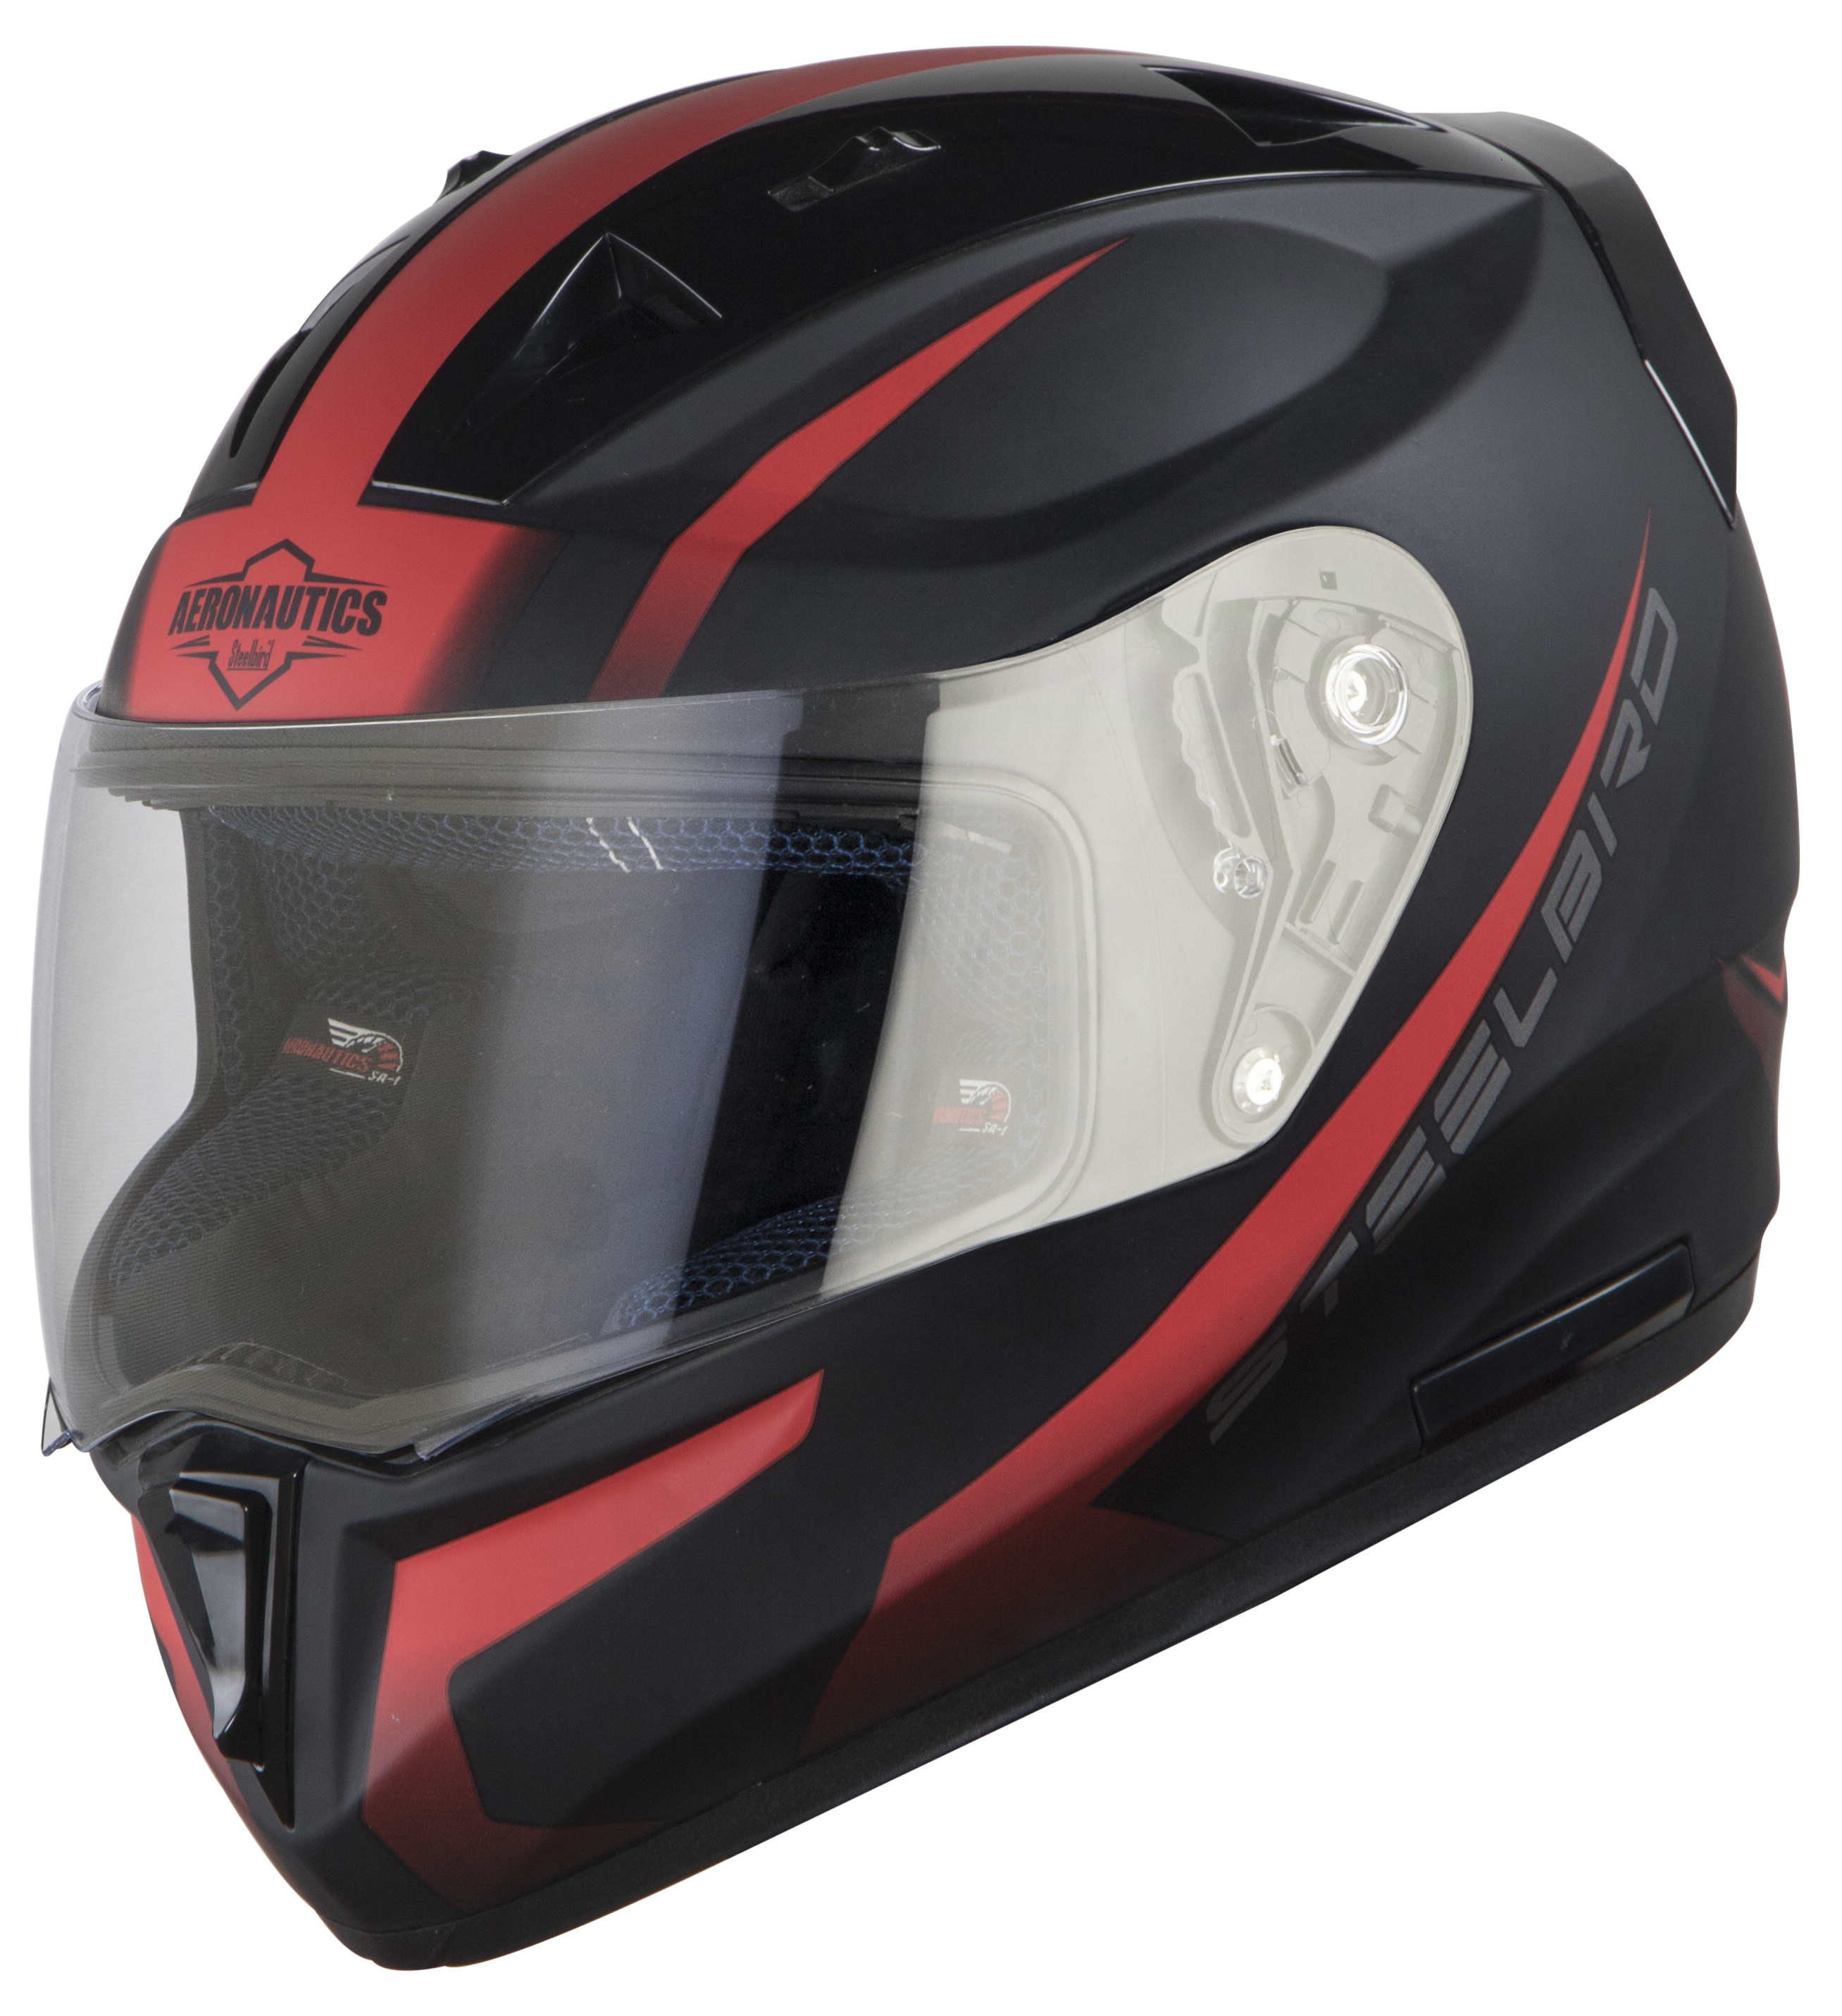 Steelbird SA-1 Whif ISI Certified Full Face Helmet (Matt Black Red With Clear Visor)